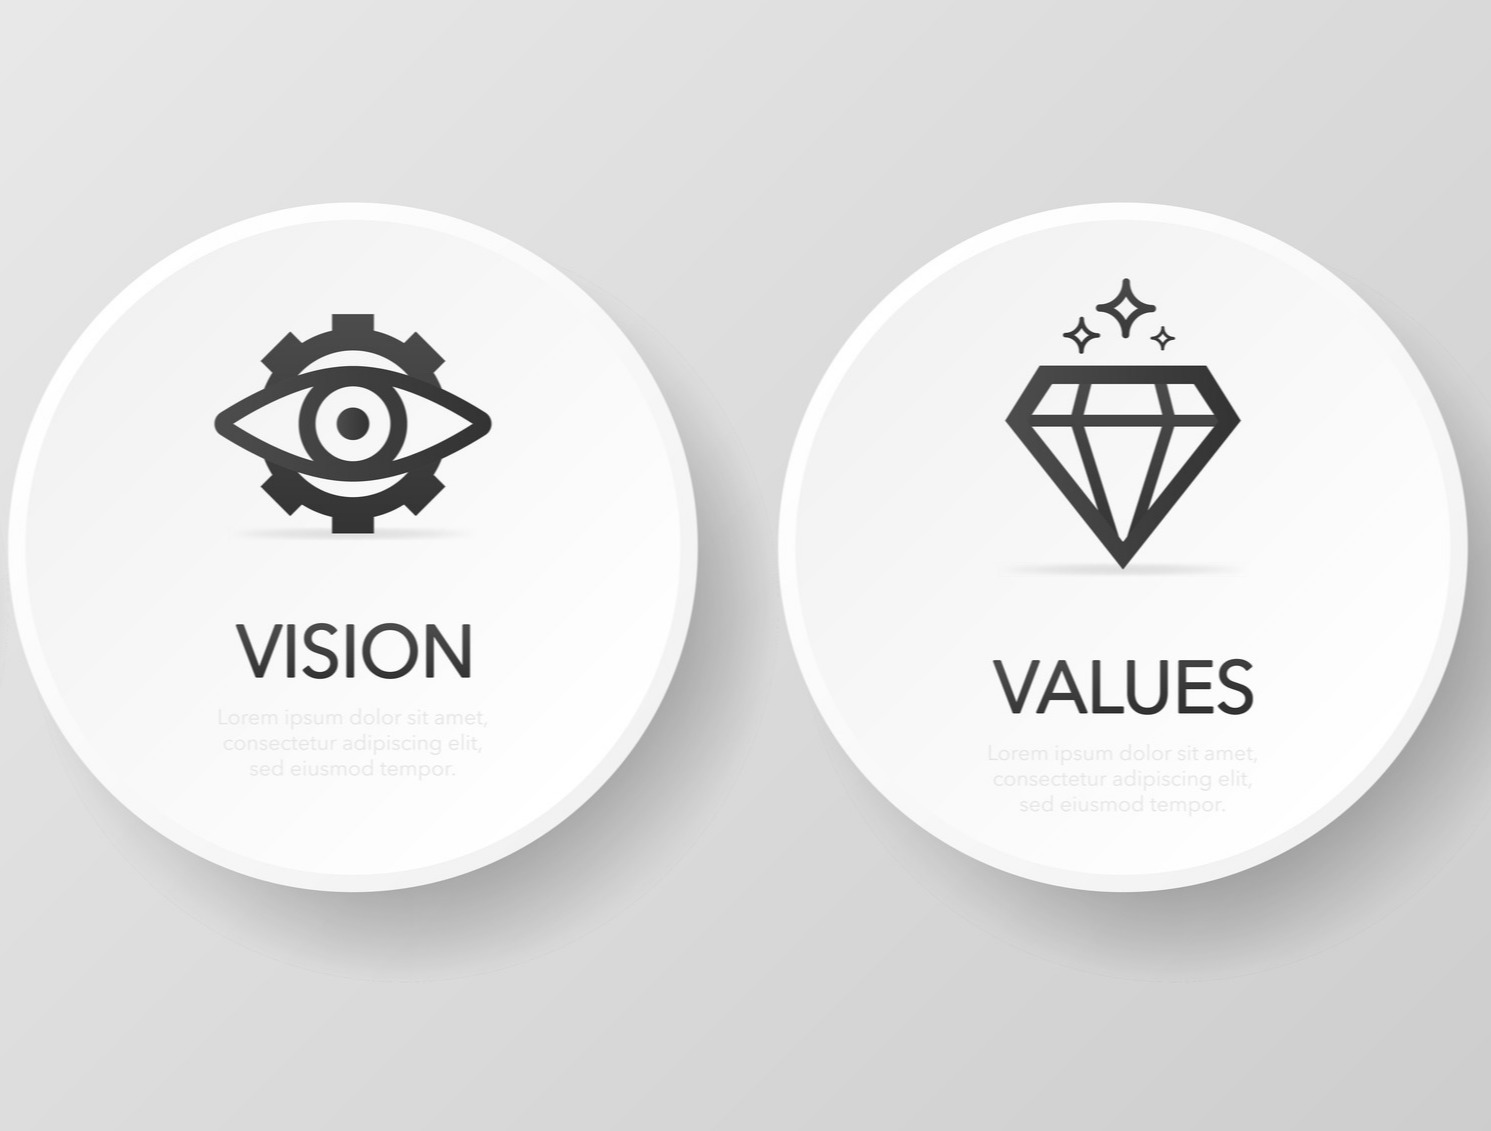 Our Vision and Values